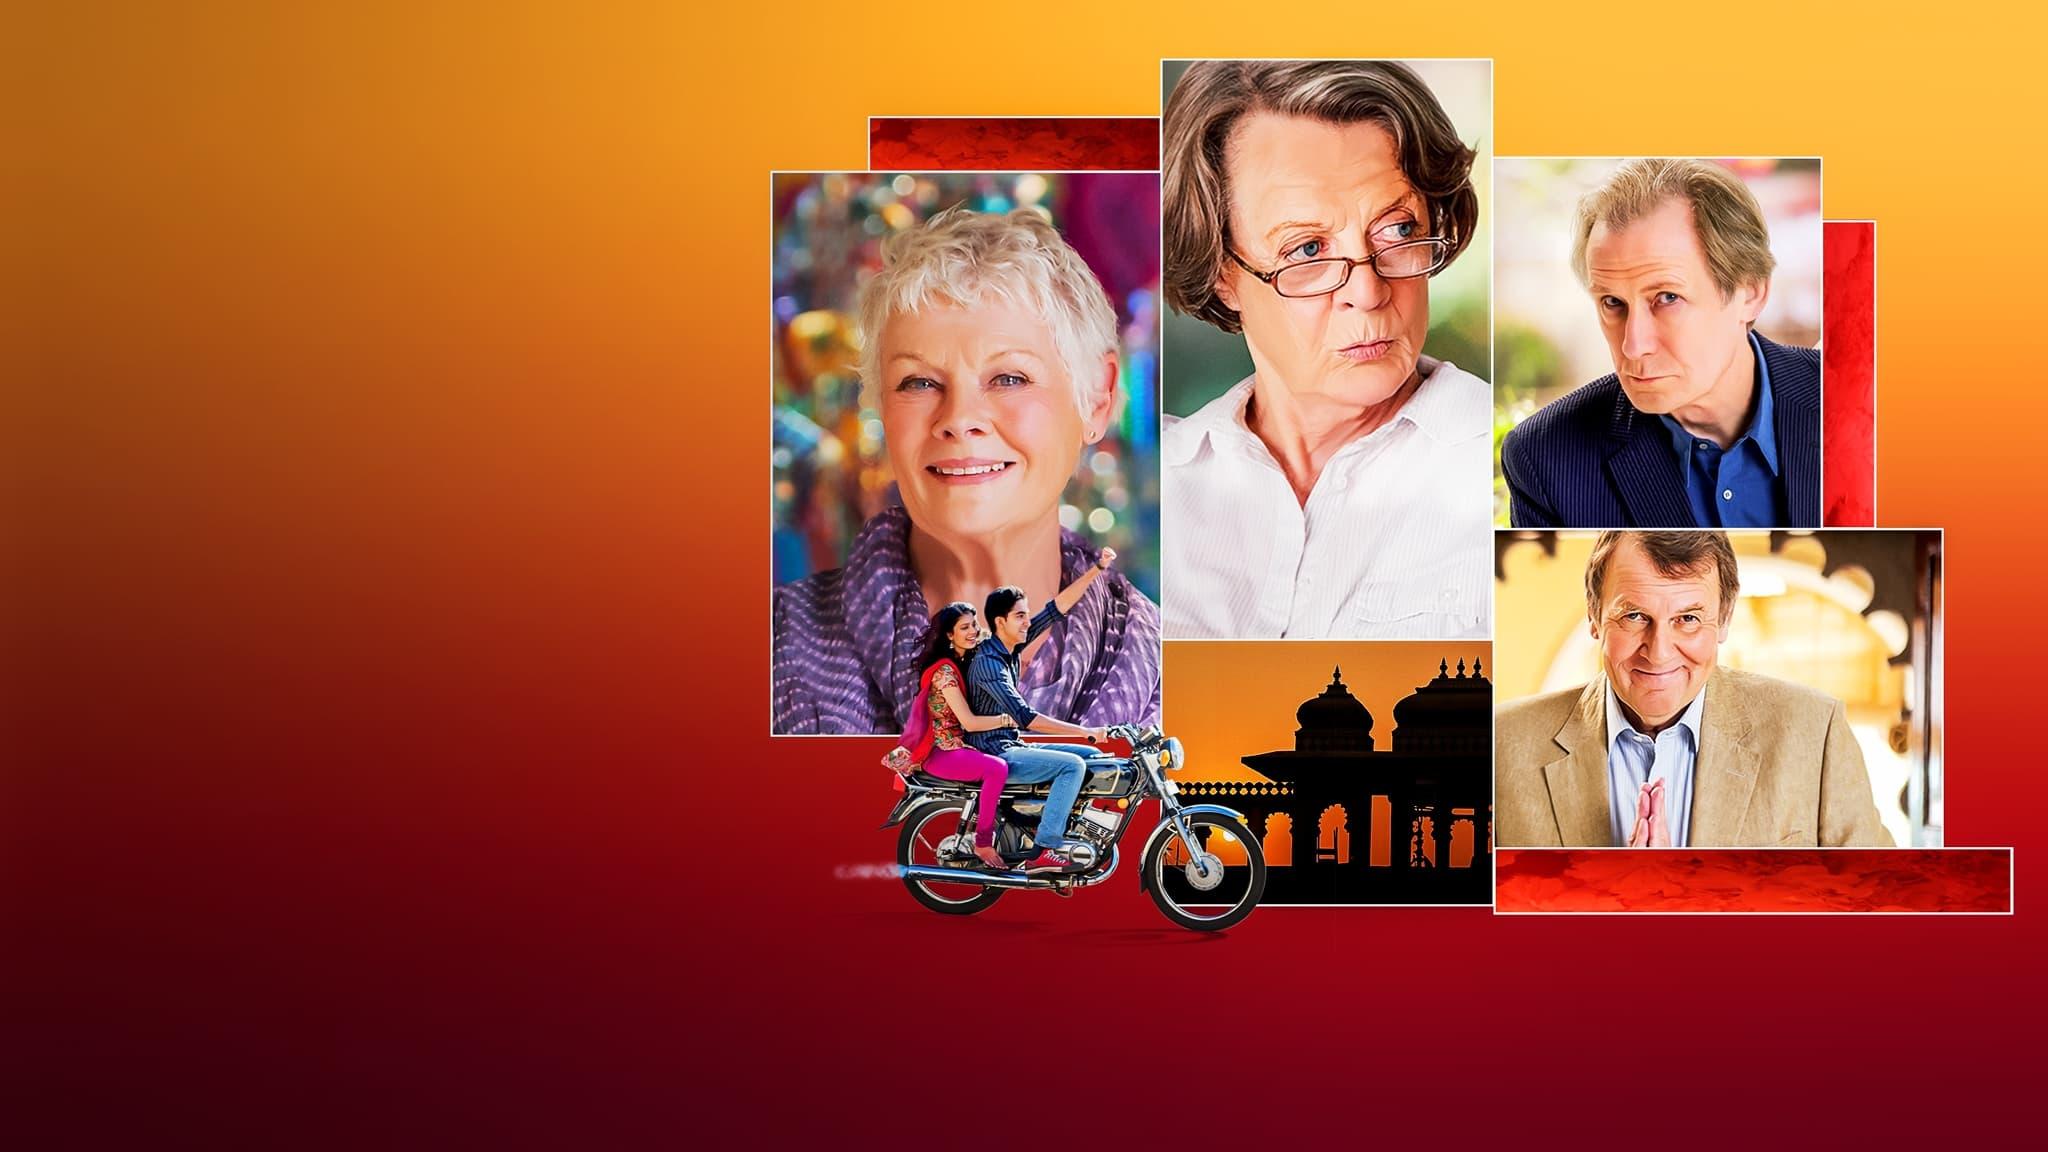 The Best Exotic Marigold Hotel backdrop